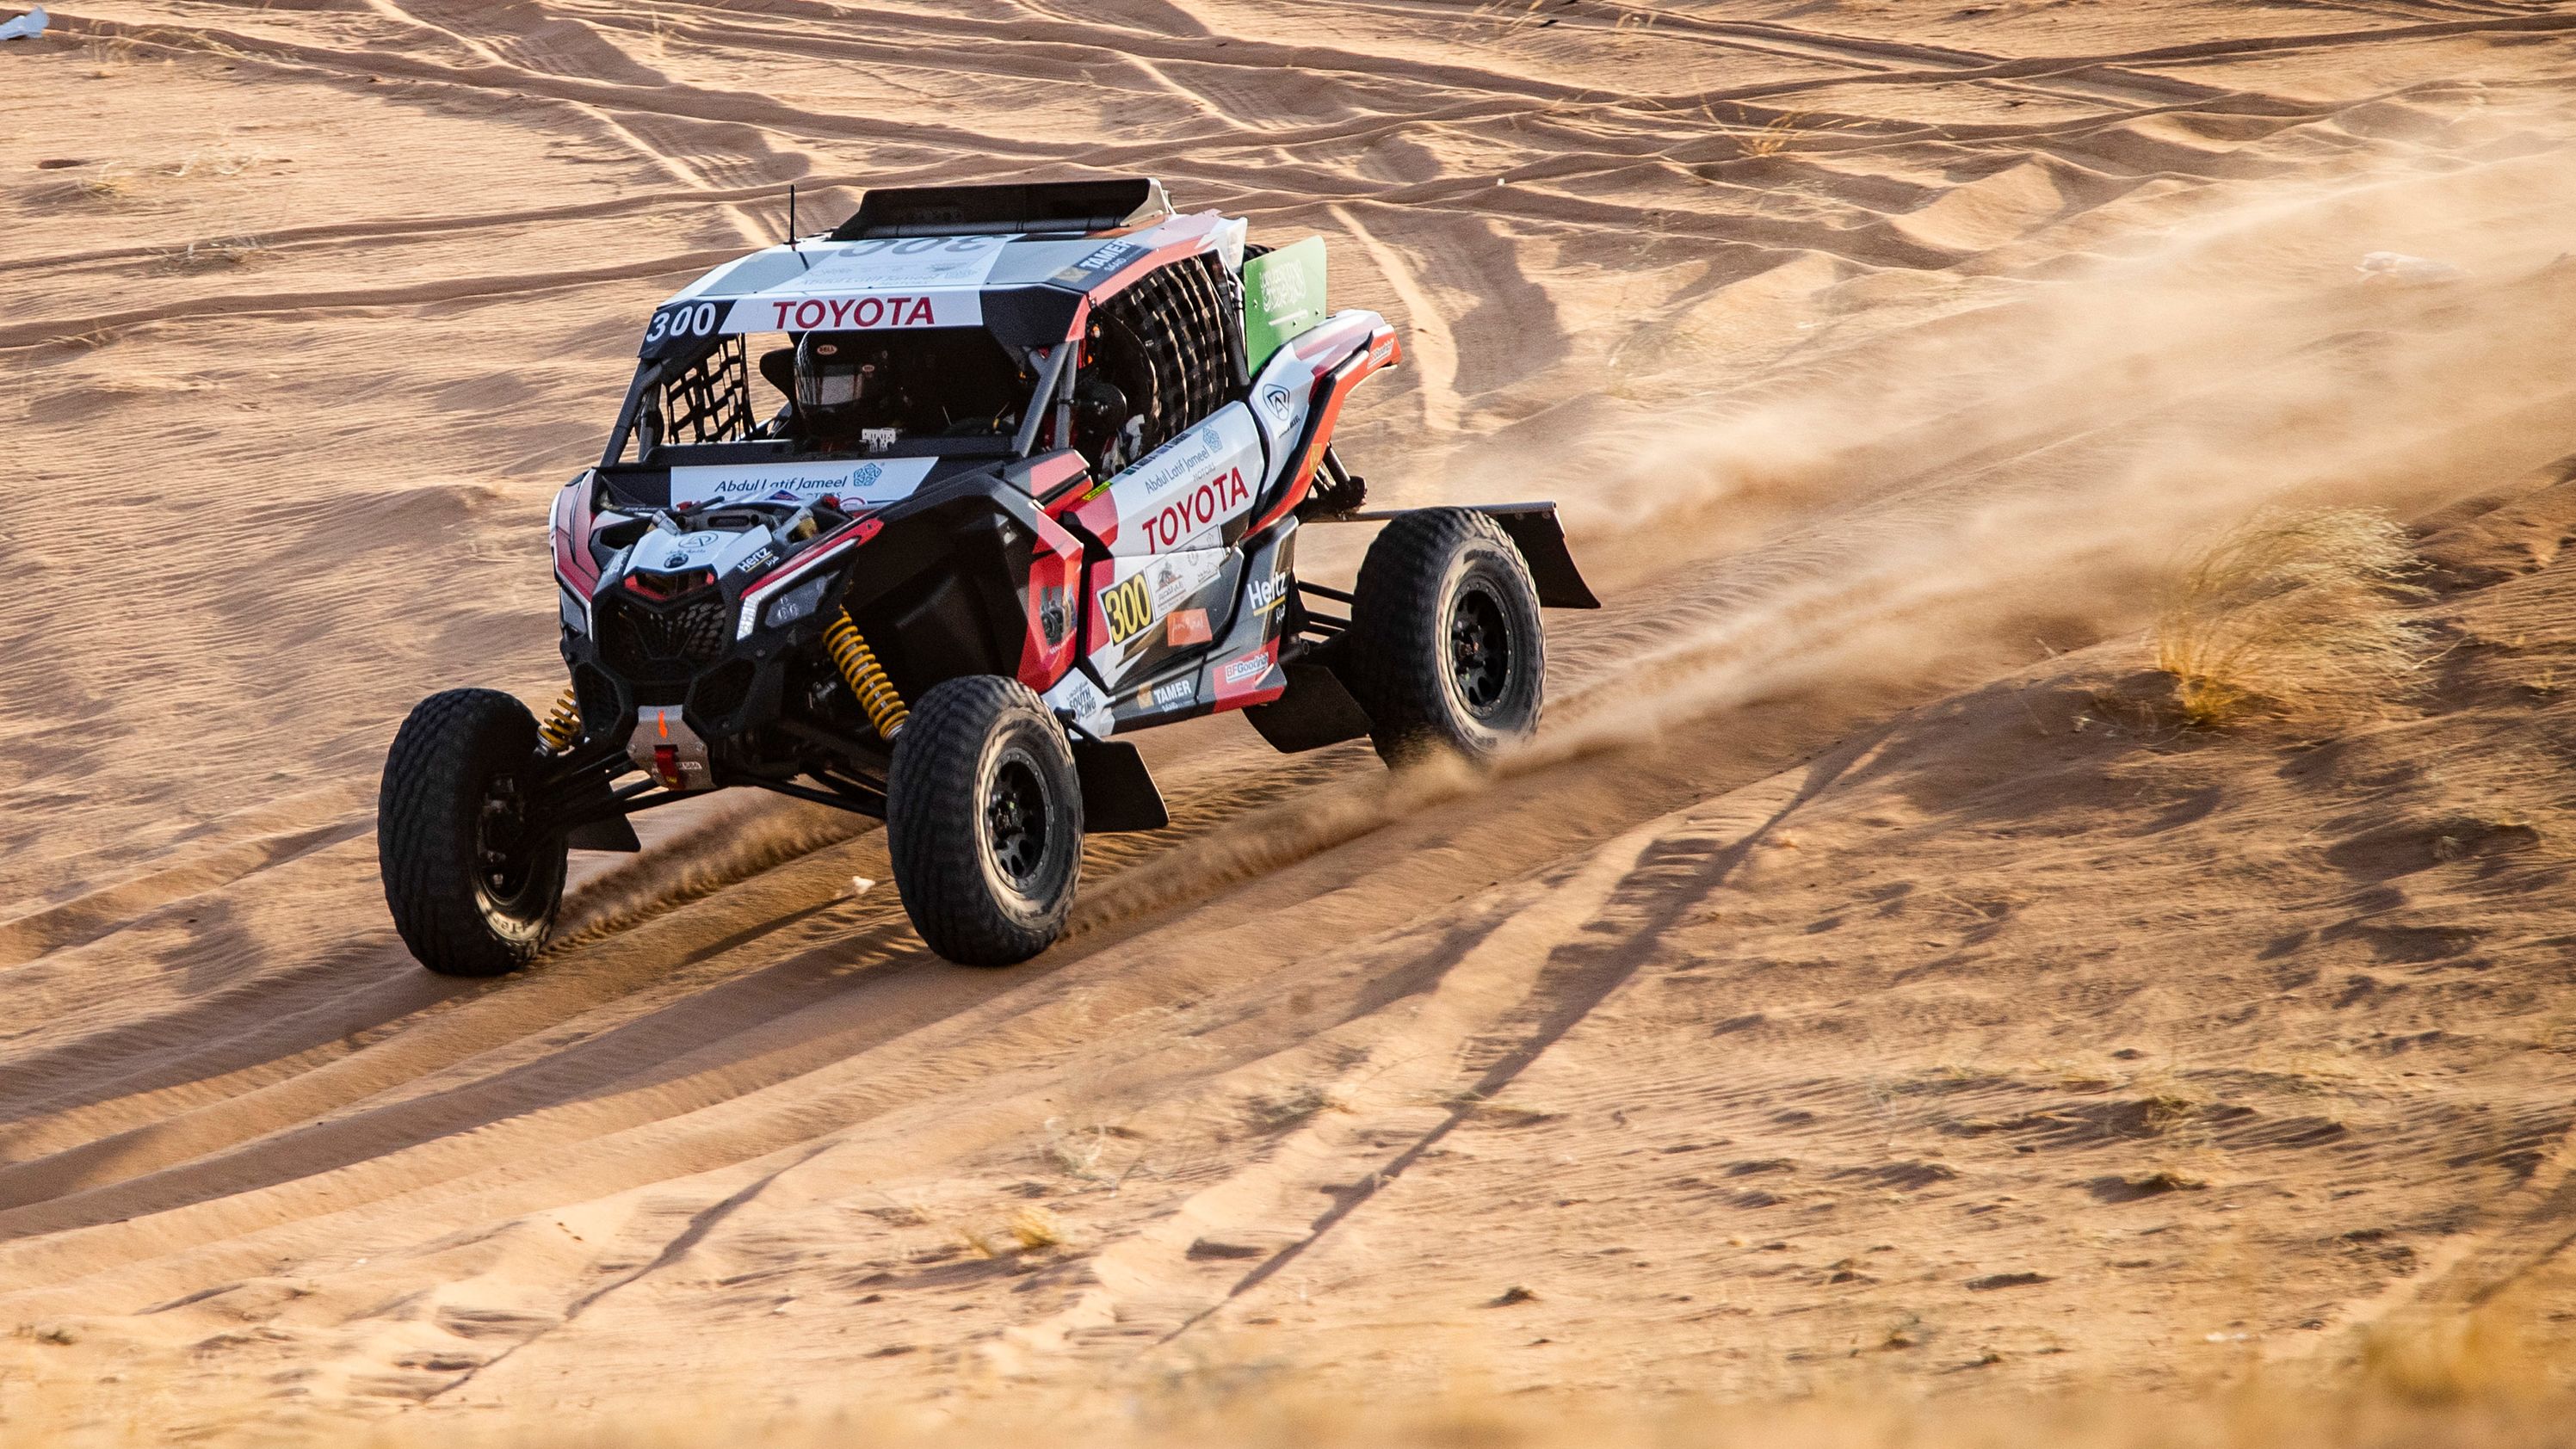 Akeel drives a Can-Am UTV, designed to tackle the varied terrain of cross-country racing.